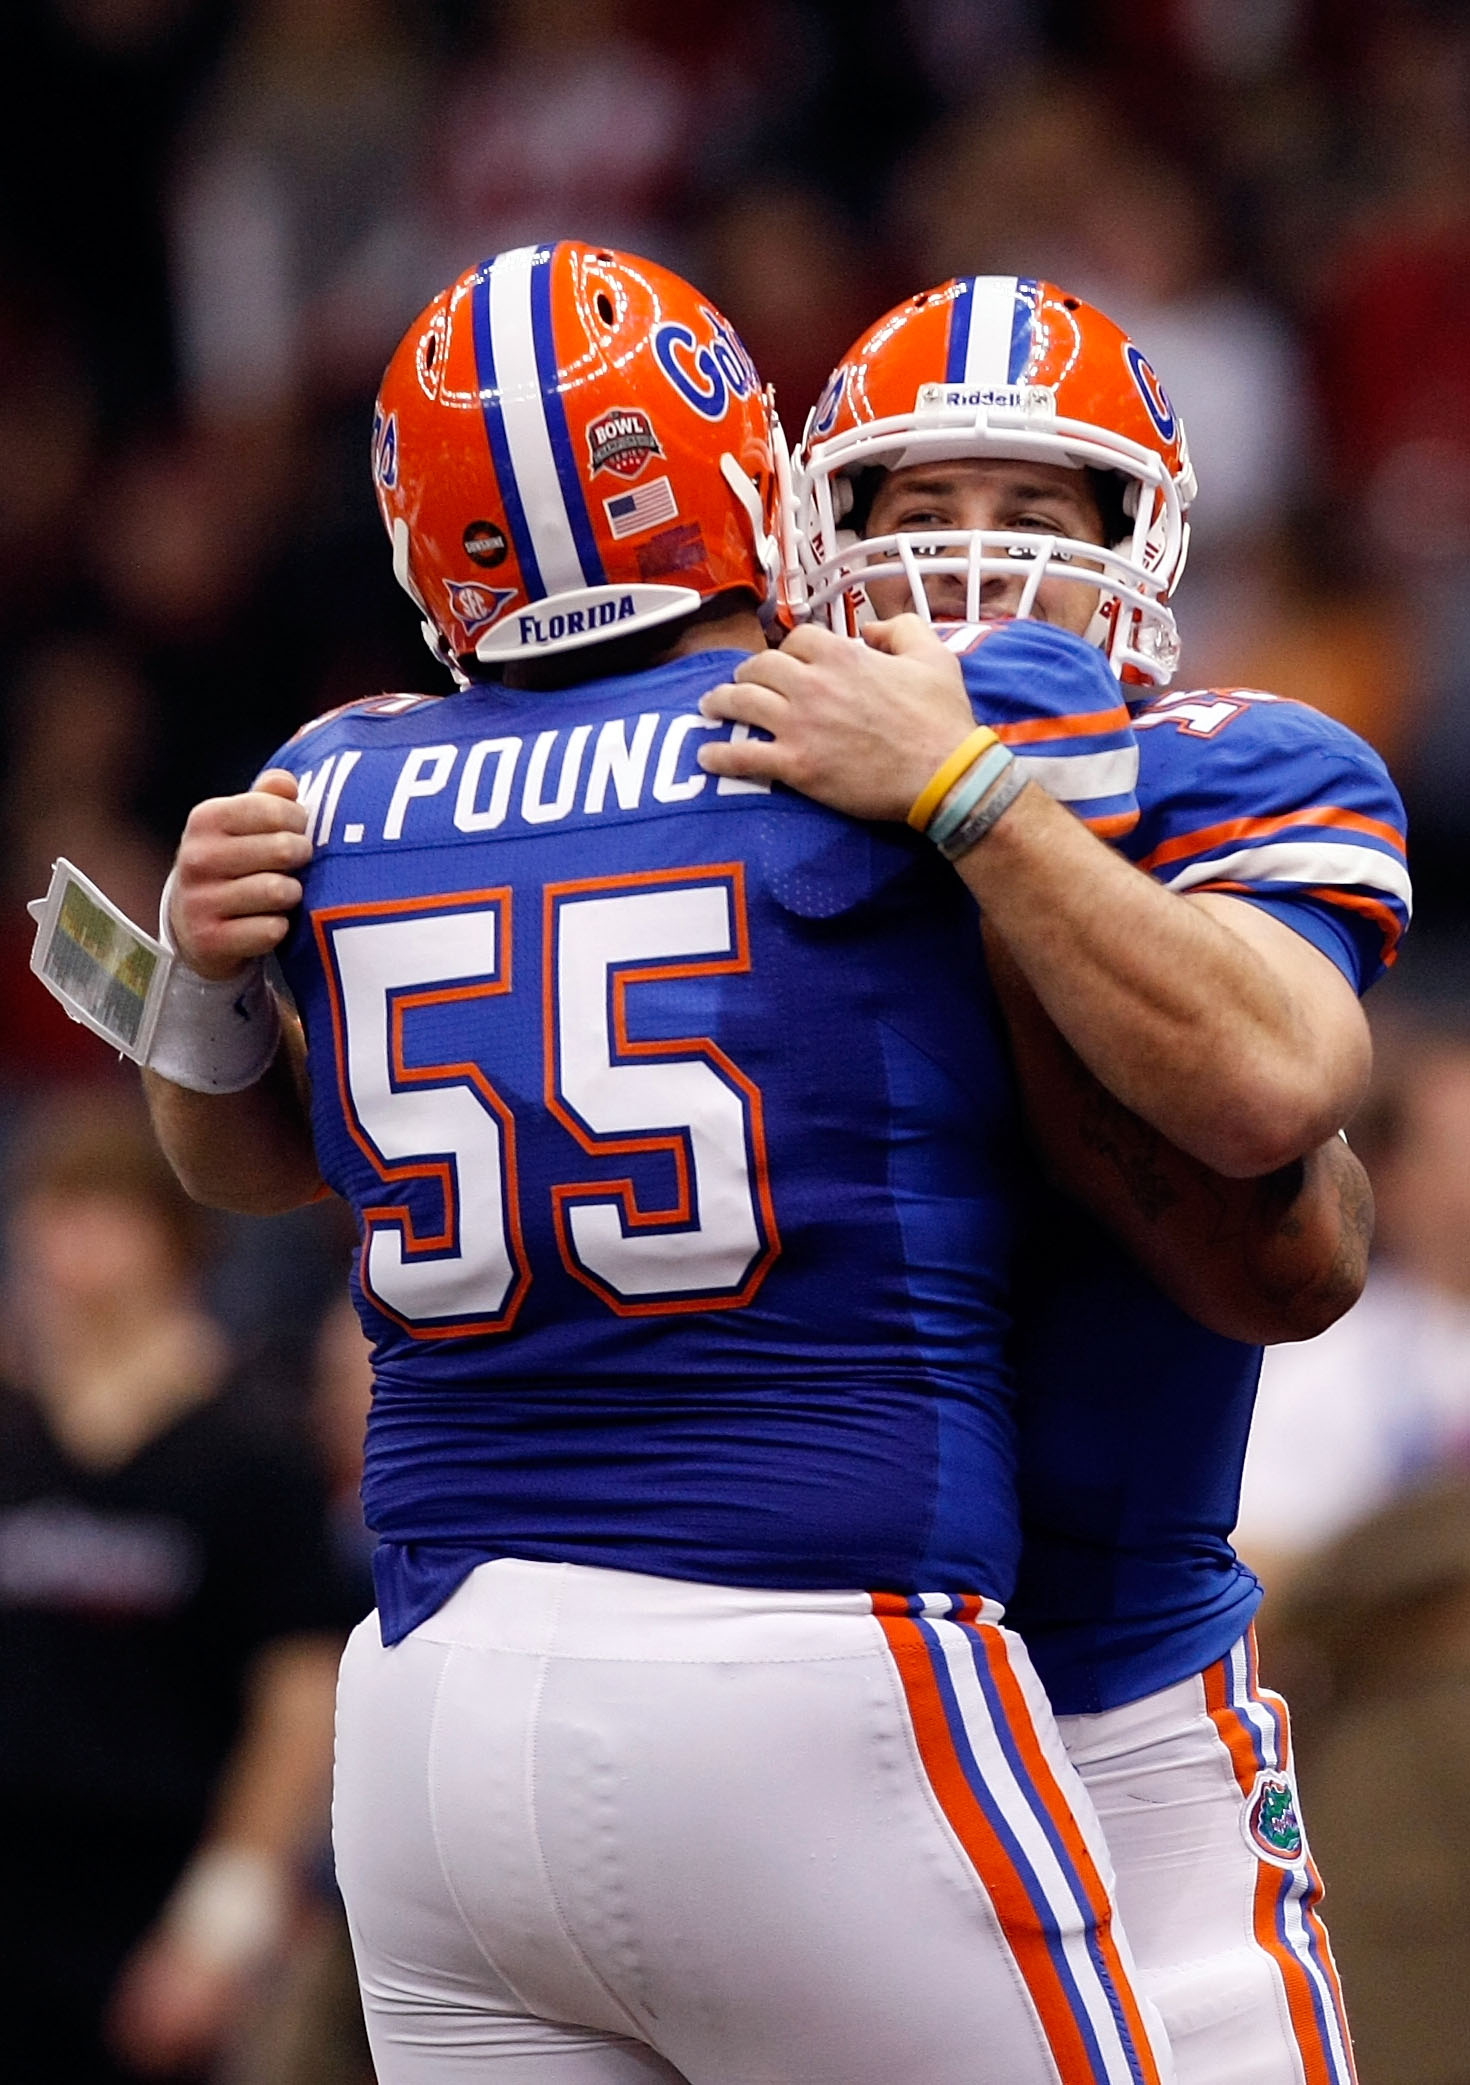 NEW ORLEANS - JANUARY 01:  Tim Tebow #15 of the Florida Gators hugs teammate Mike Pouncey #55 after scoring a touchdown against the Cincinnati Bearcats during the Allstate Sugar Bowl at the Louisana Superdome on January 1, 2010 in New Orleans, Louisiana.